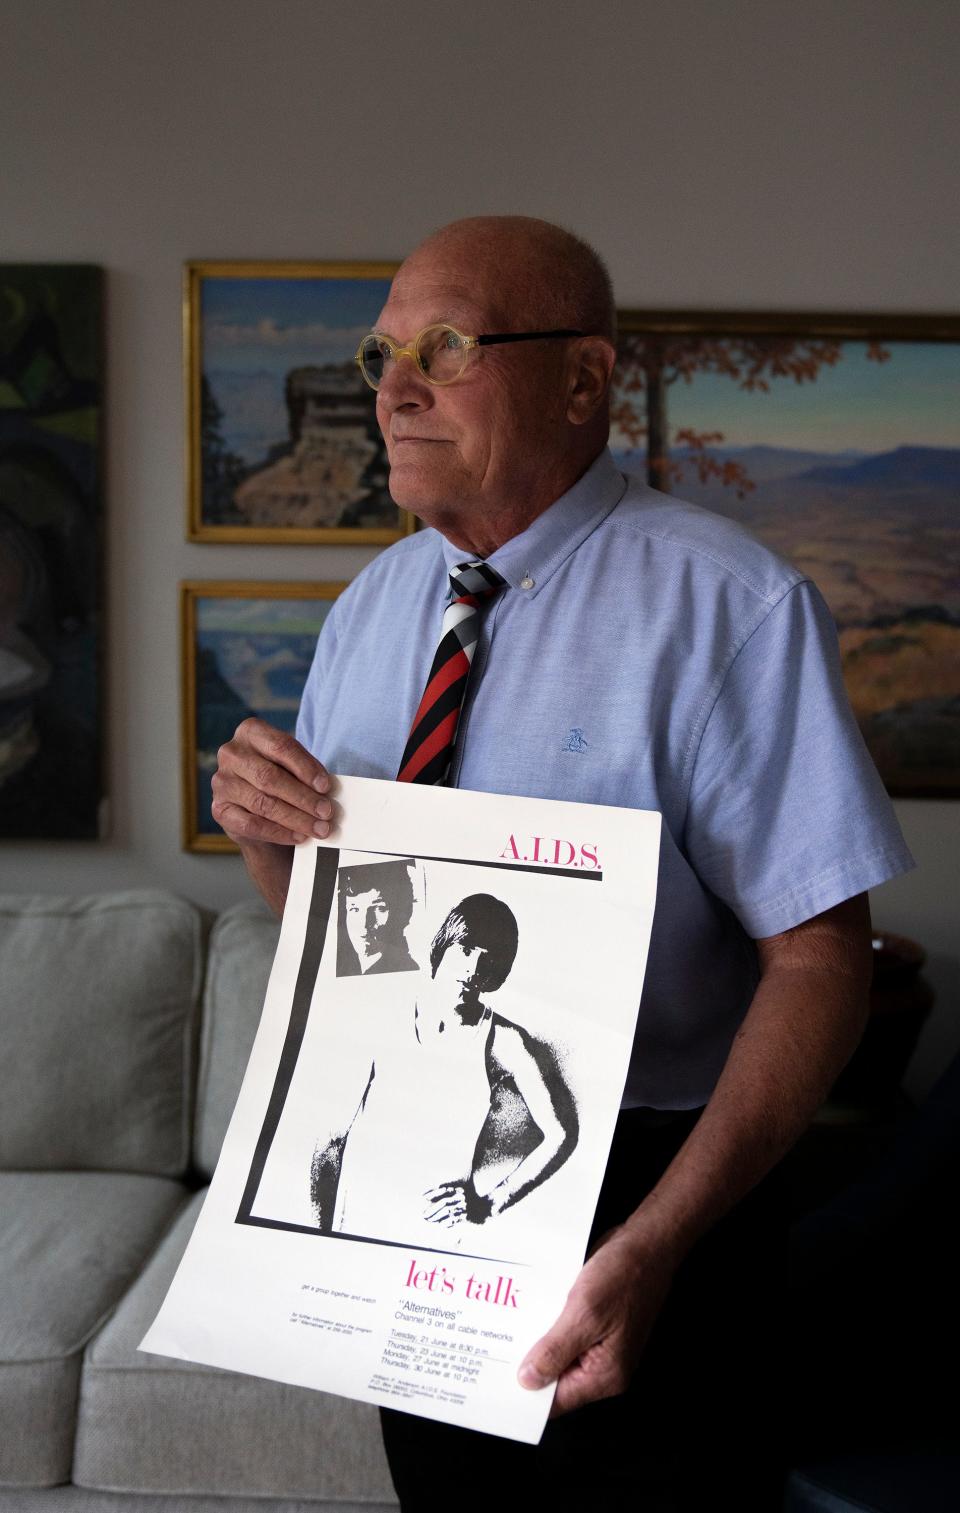 Steve Shellabarger holds a poster he created in 1988 to raise awareness about AIDS in the Columbus community. More than 40 years after the HIV/AIDS epidemic surfaced in Ohio, Shellabarger continues to be an advocate for LGBTQ rights.